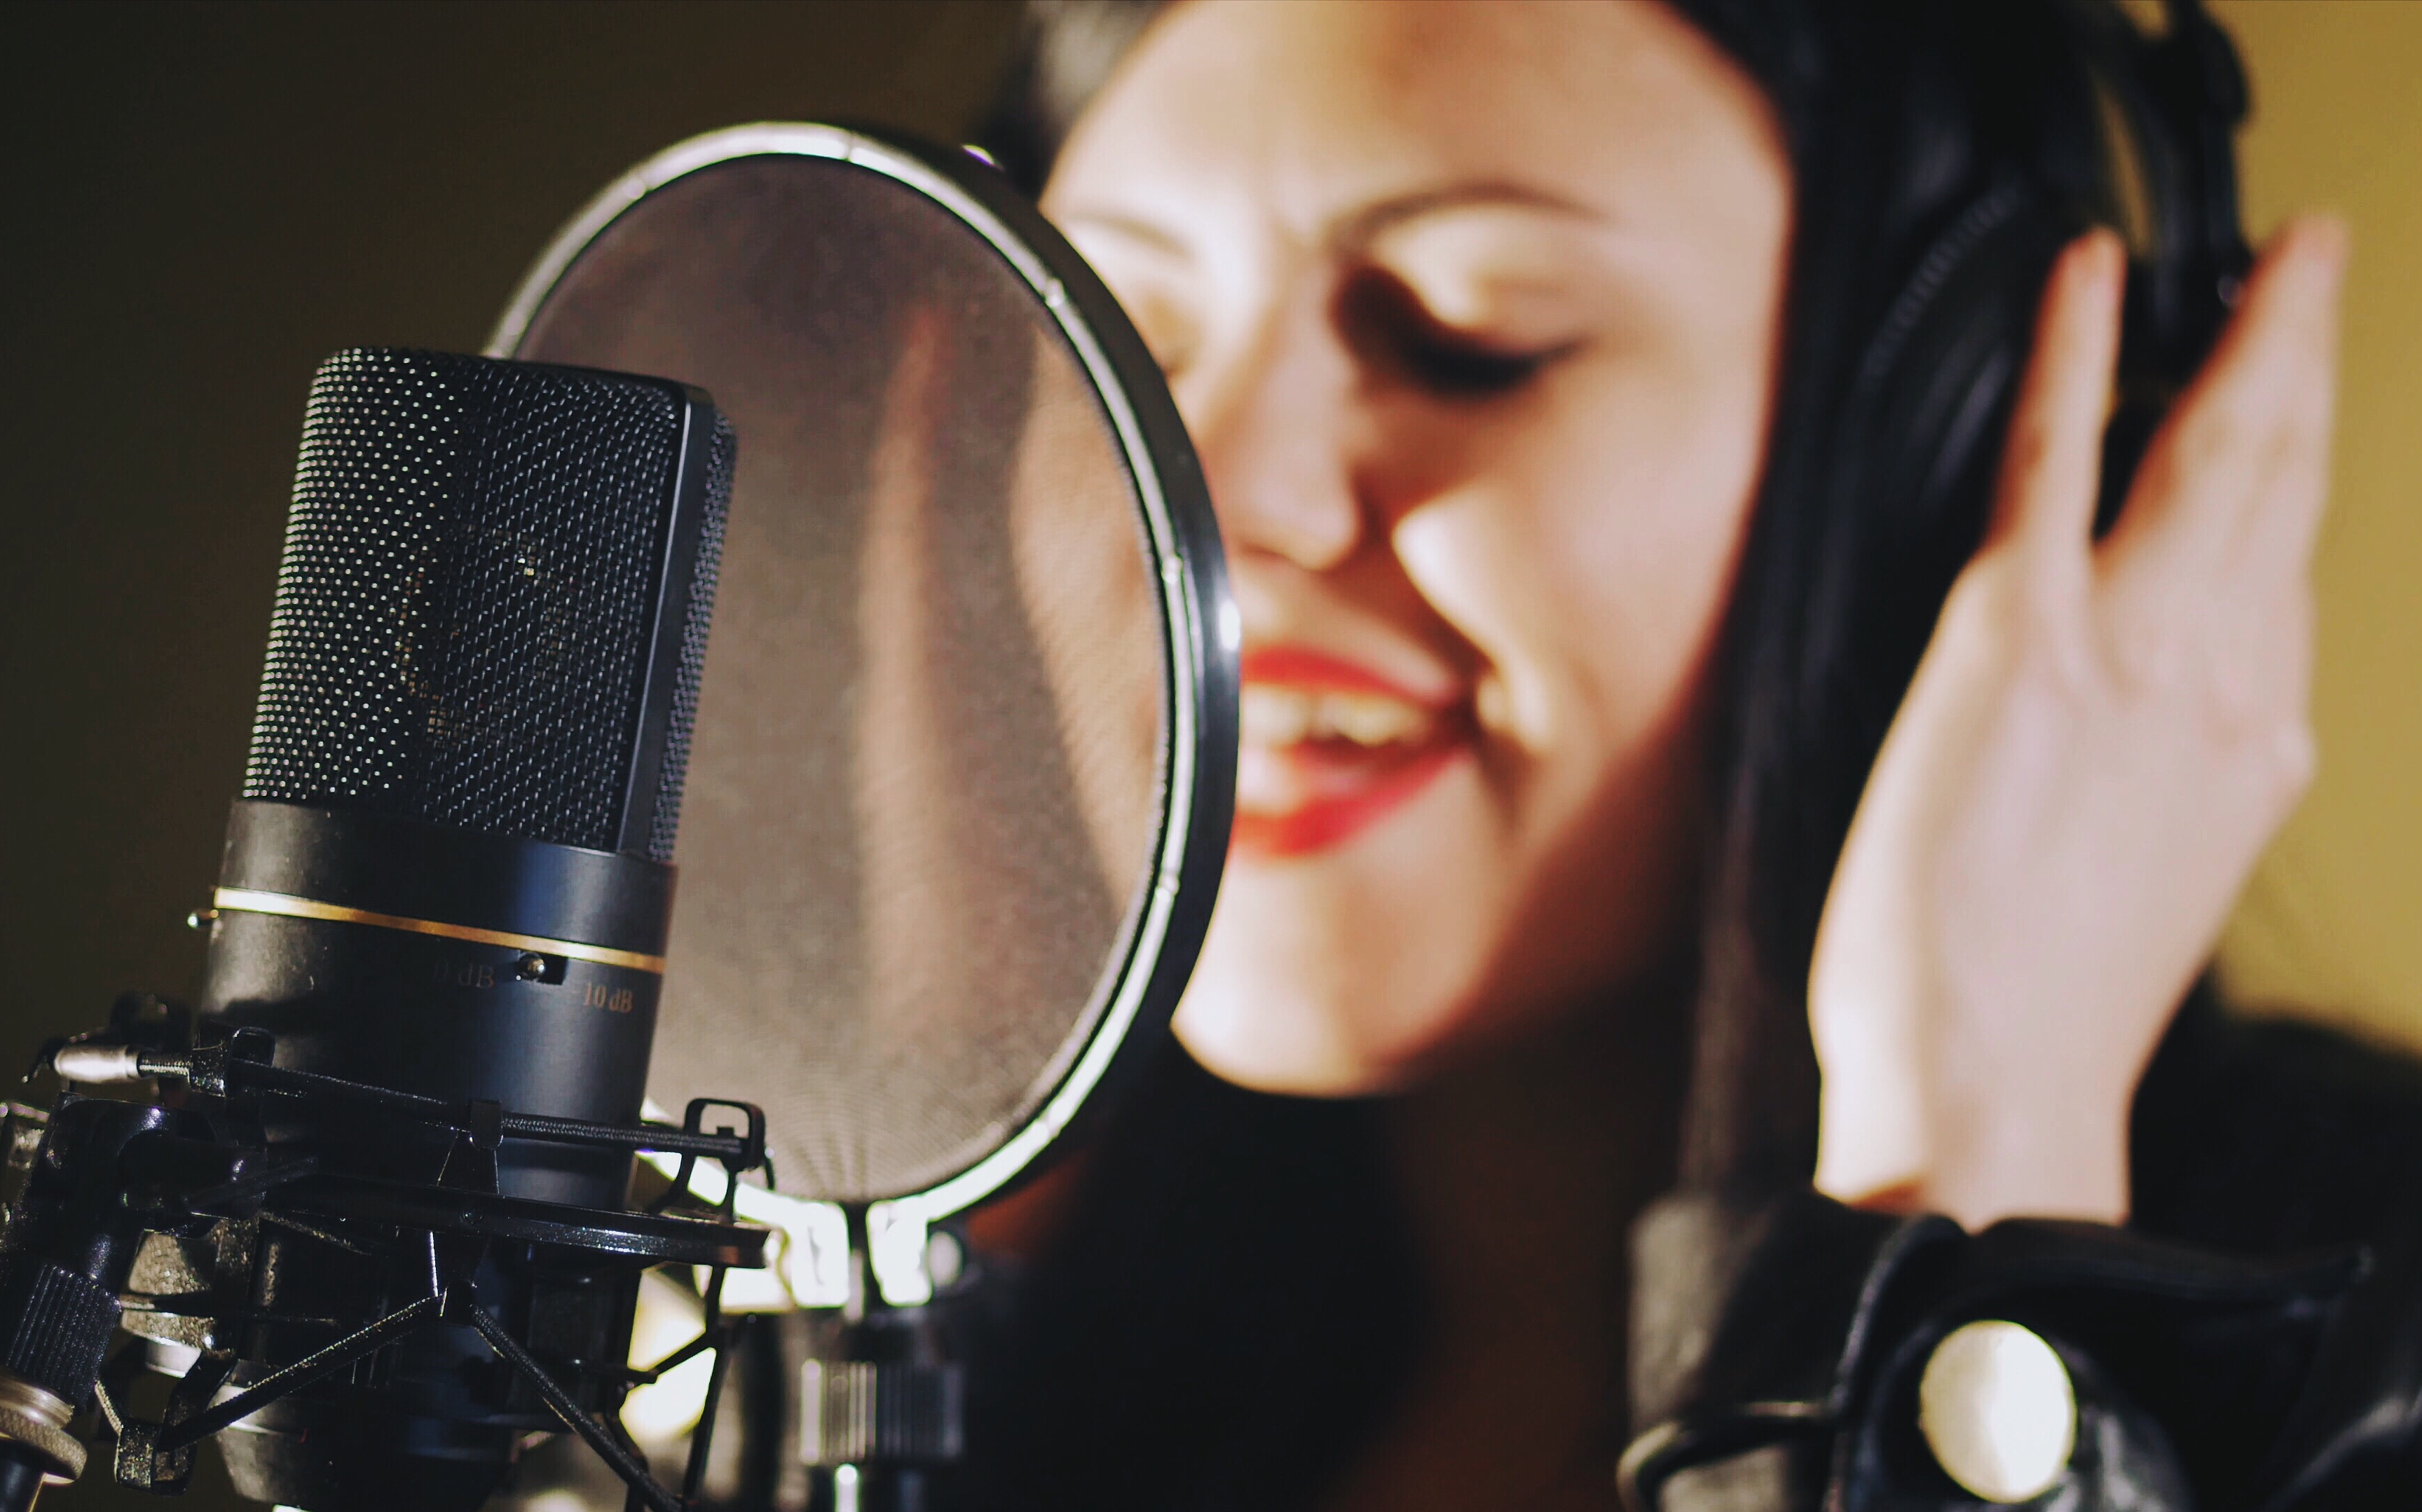 Женщина голос дома. Voice over. Singing. Voice over фото. Vocal recording session.